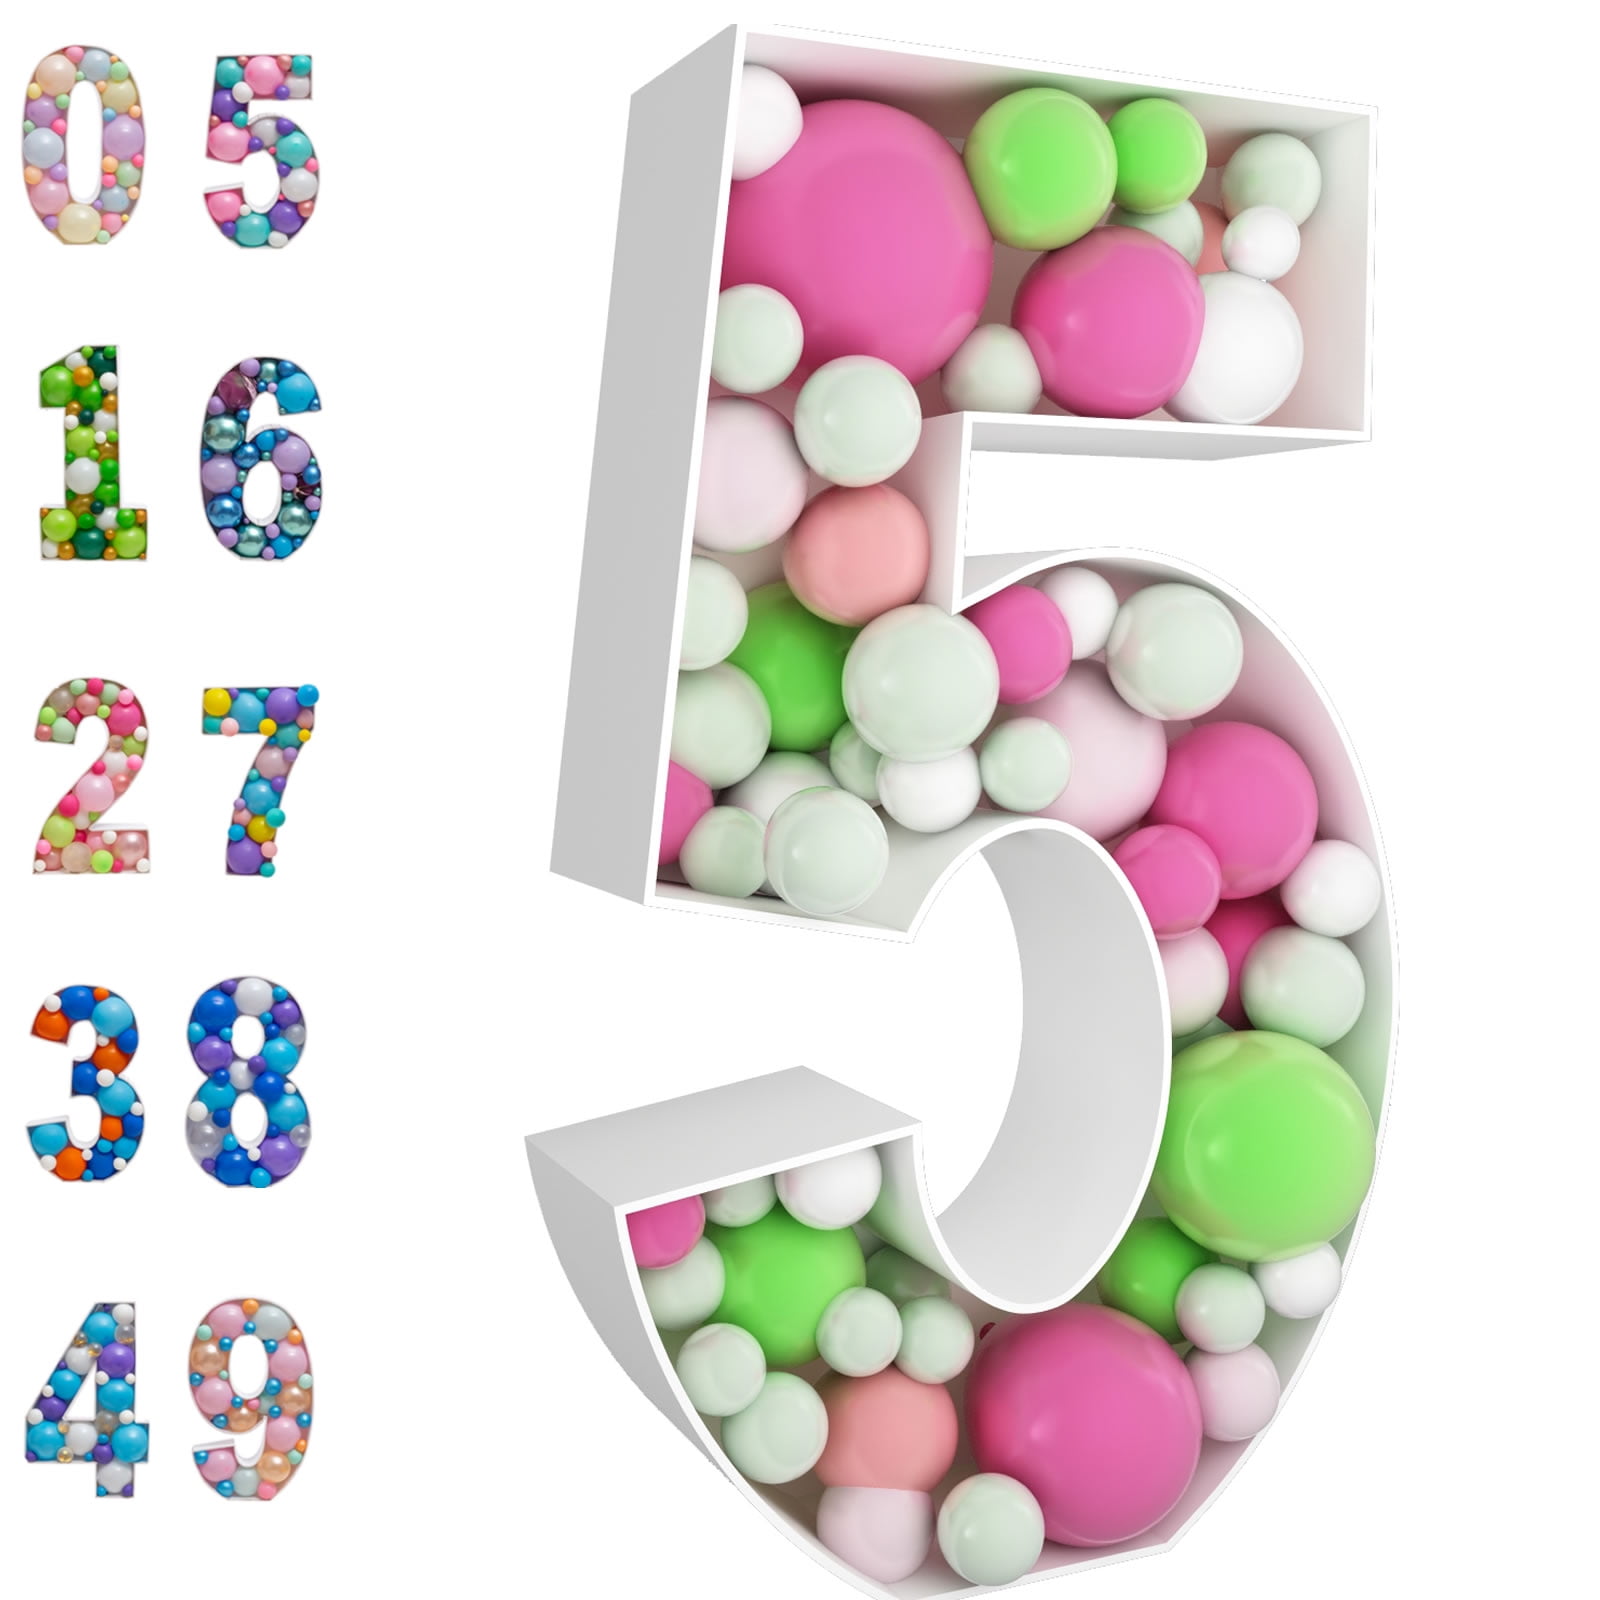 5FT Mosaic Number for Balloons, Giant Mosaic Balloon Frame for Party Decor,  Marquee Light up Number, Large Cardboard Number Letters for Birthday Party  decoration, Balloon Art Kits Number Balloon 2 